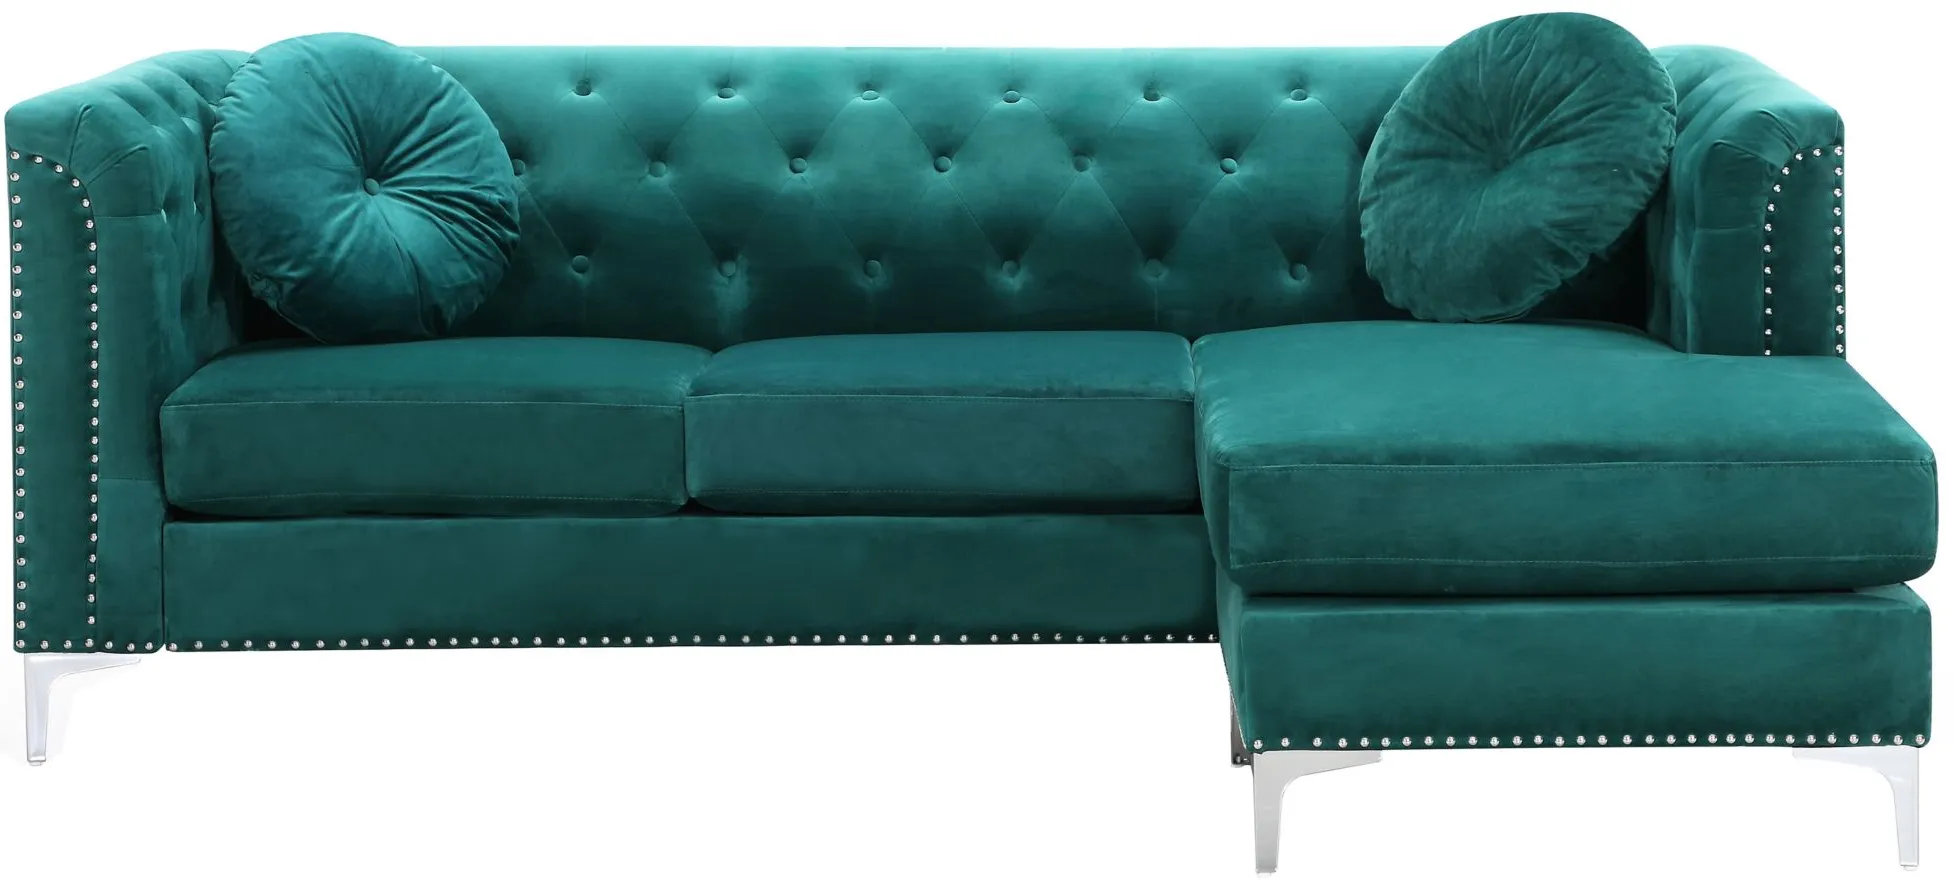 Delray 2-pc. Reversible Sectional Sofa in Green by Glory Furniture